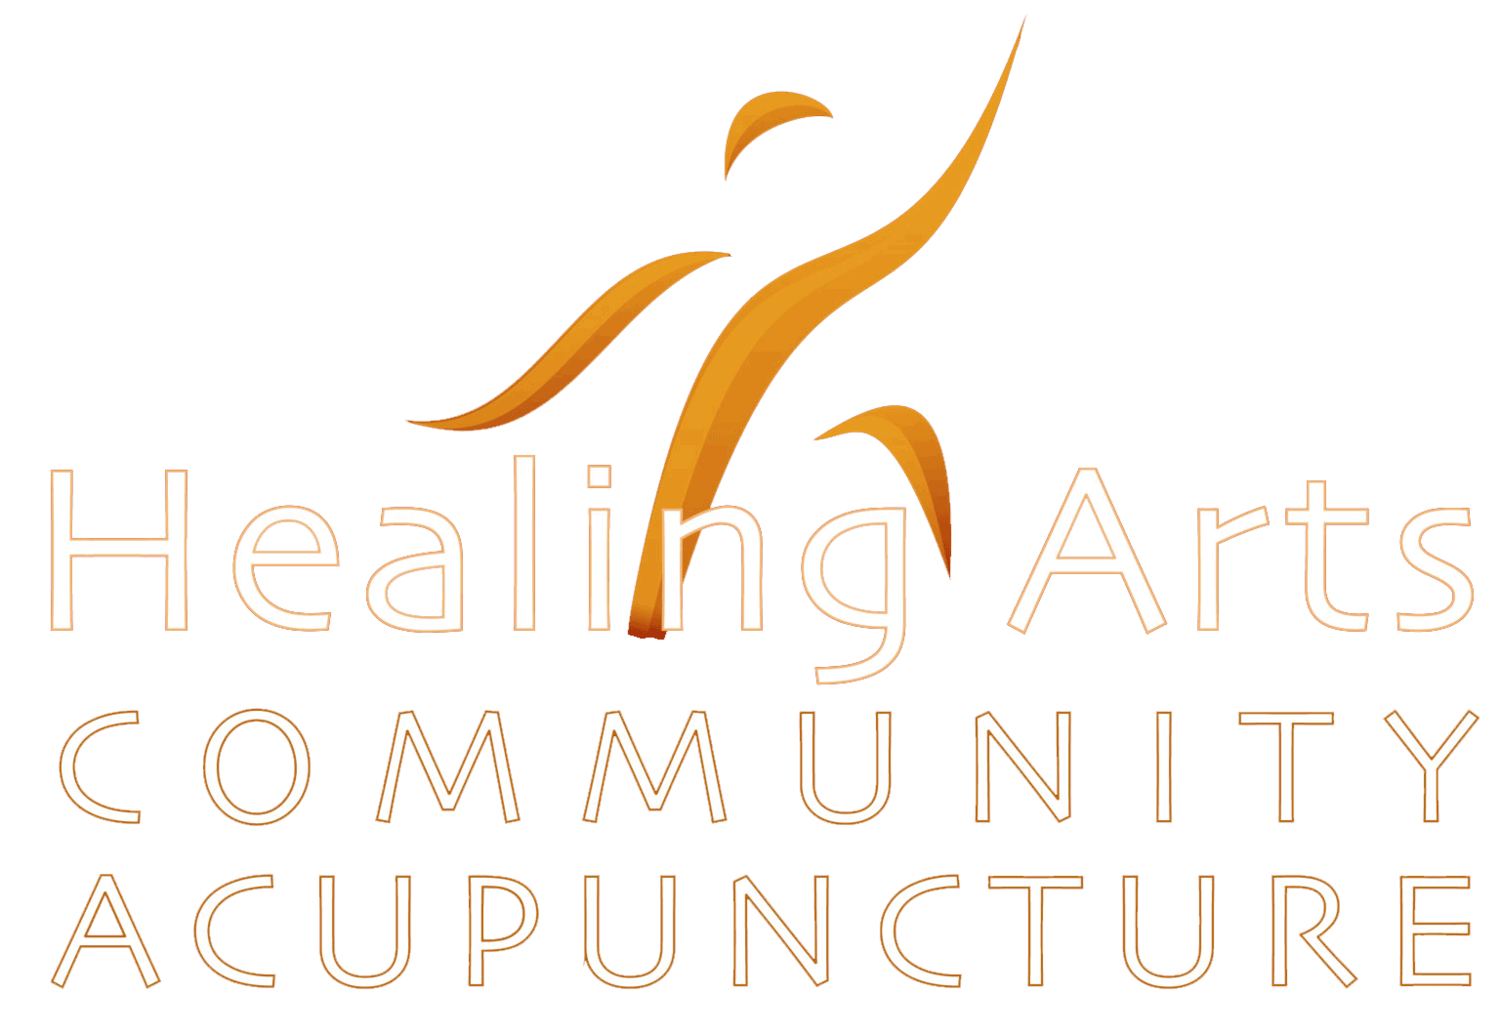 Healing Arts Community Acupuncture